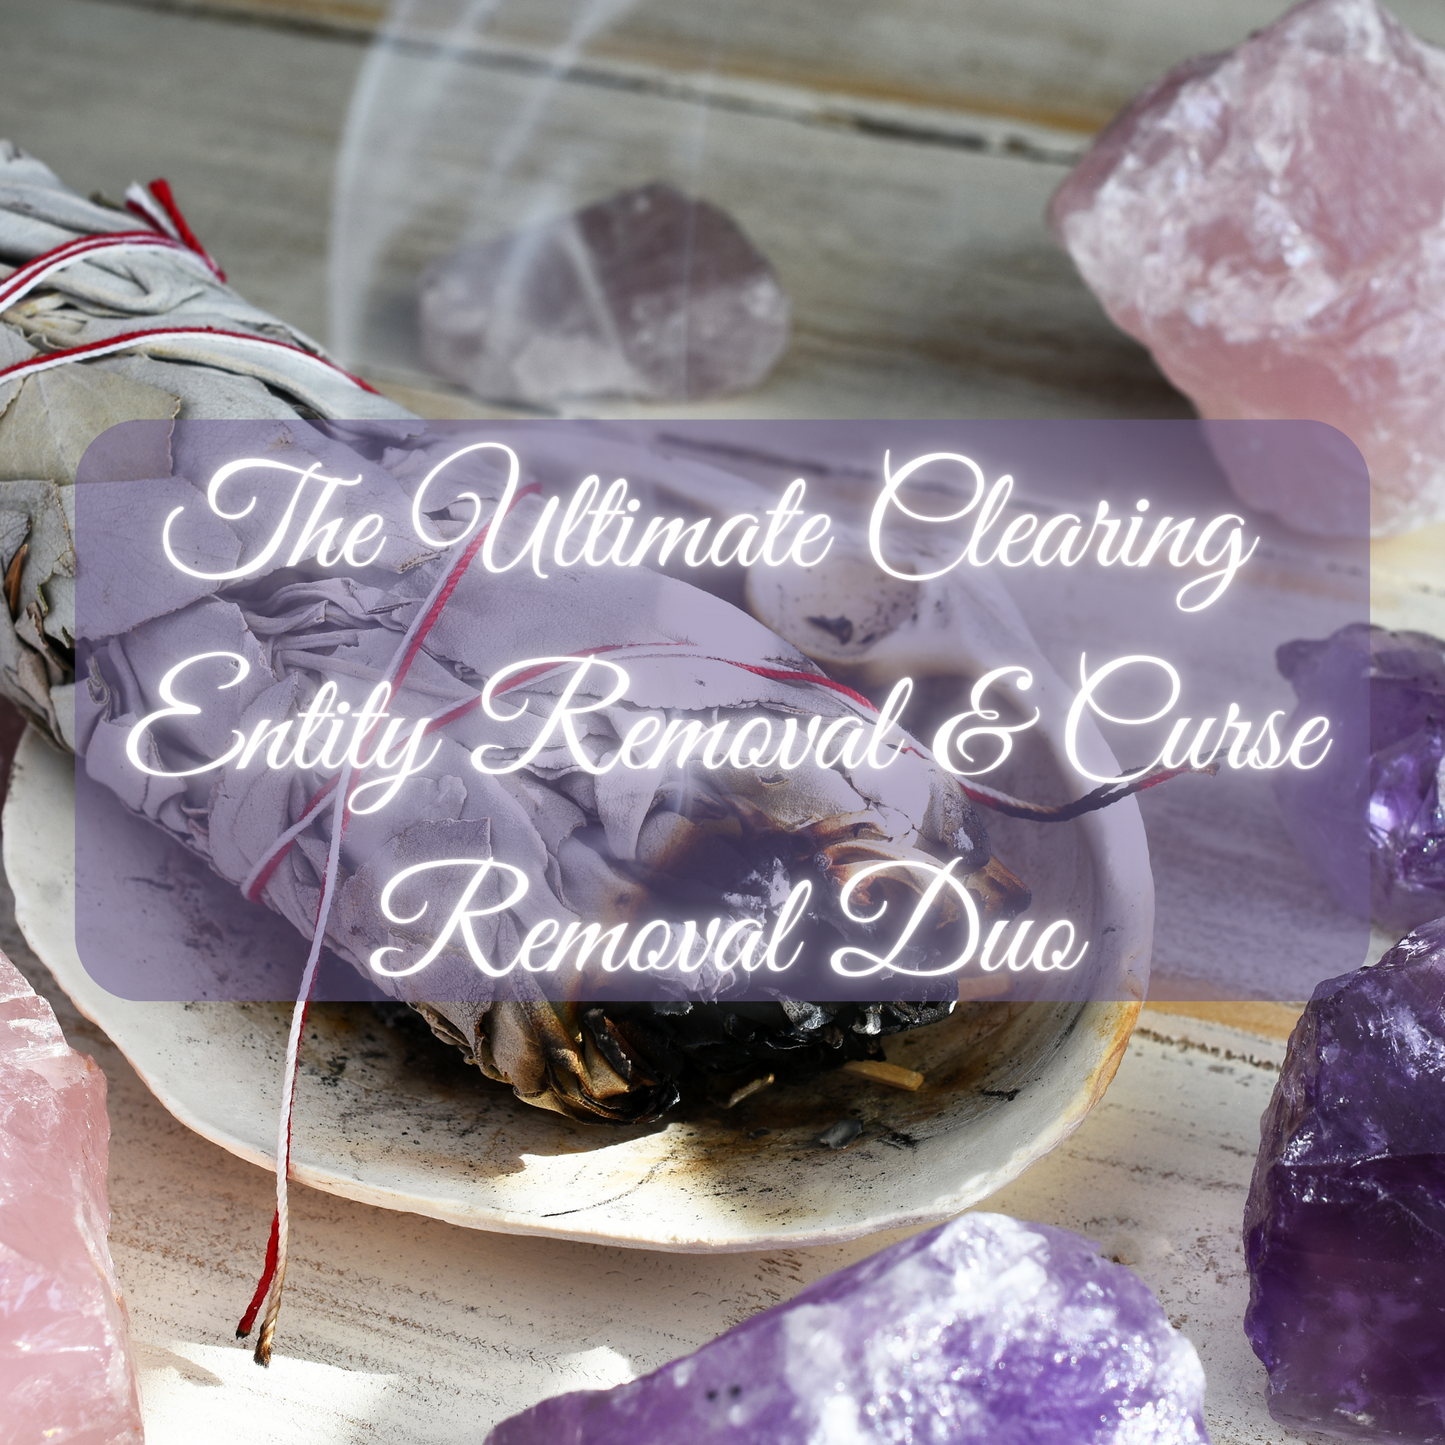 The Ultimate Clearing ~ Entity Removal & Curse Removal Duo